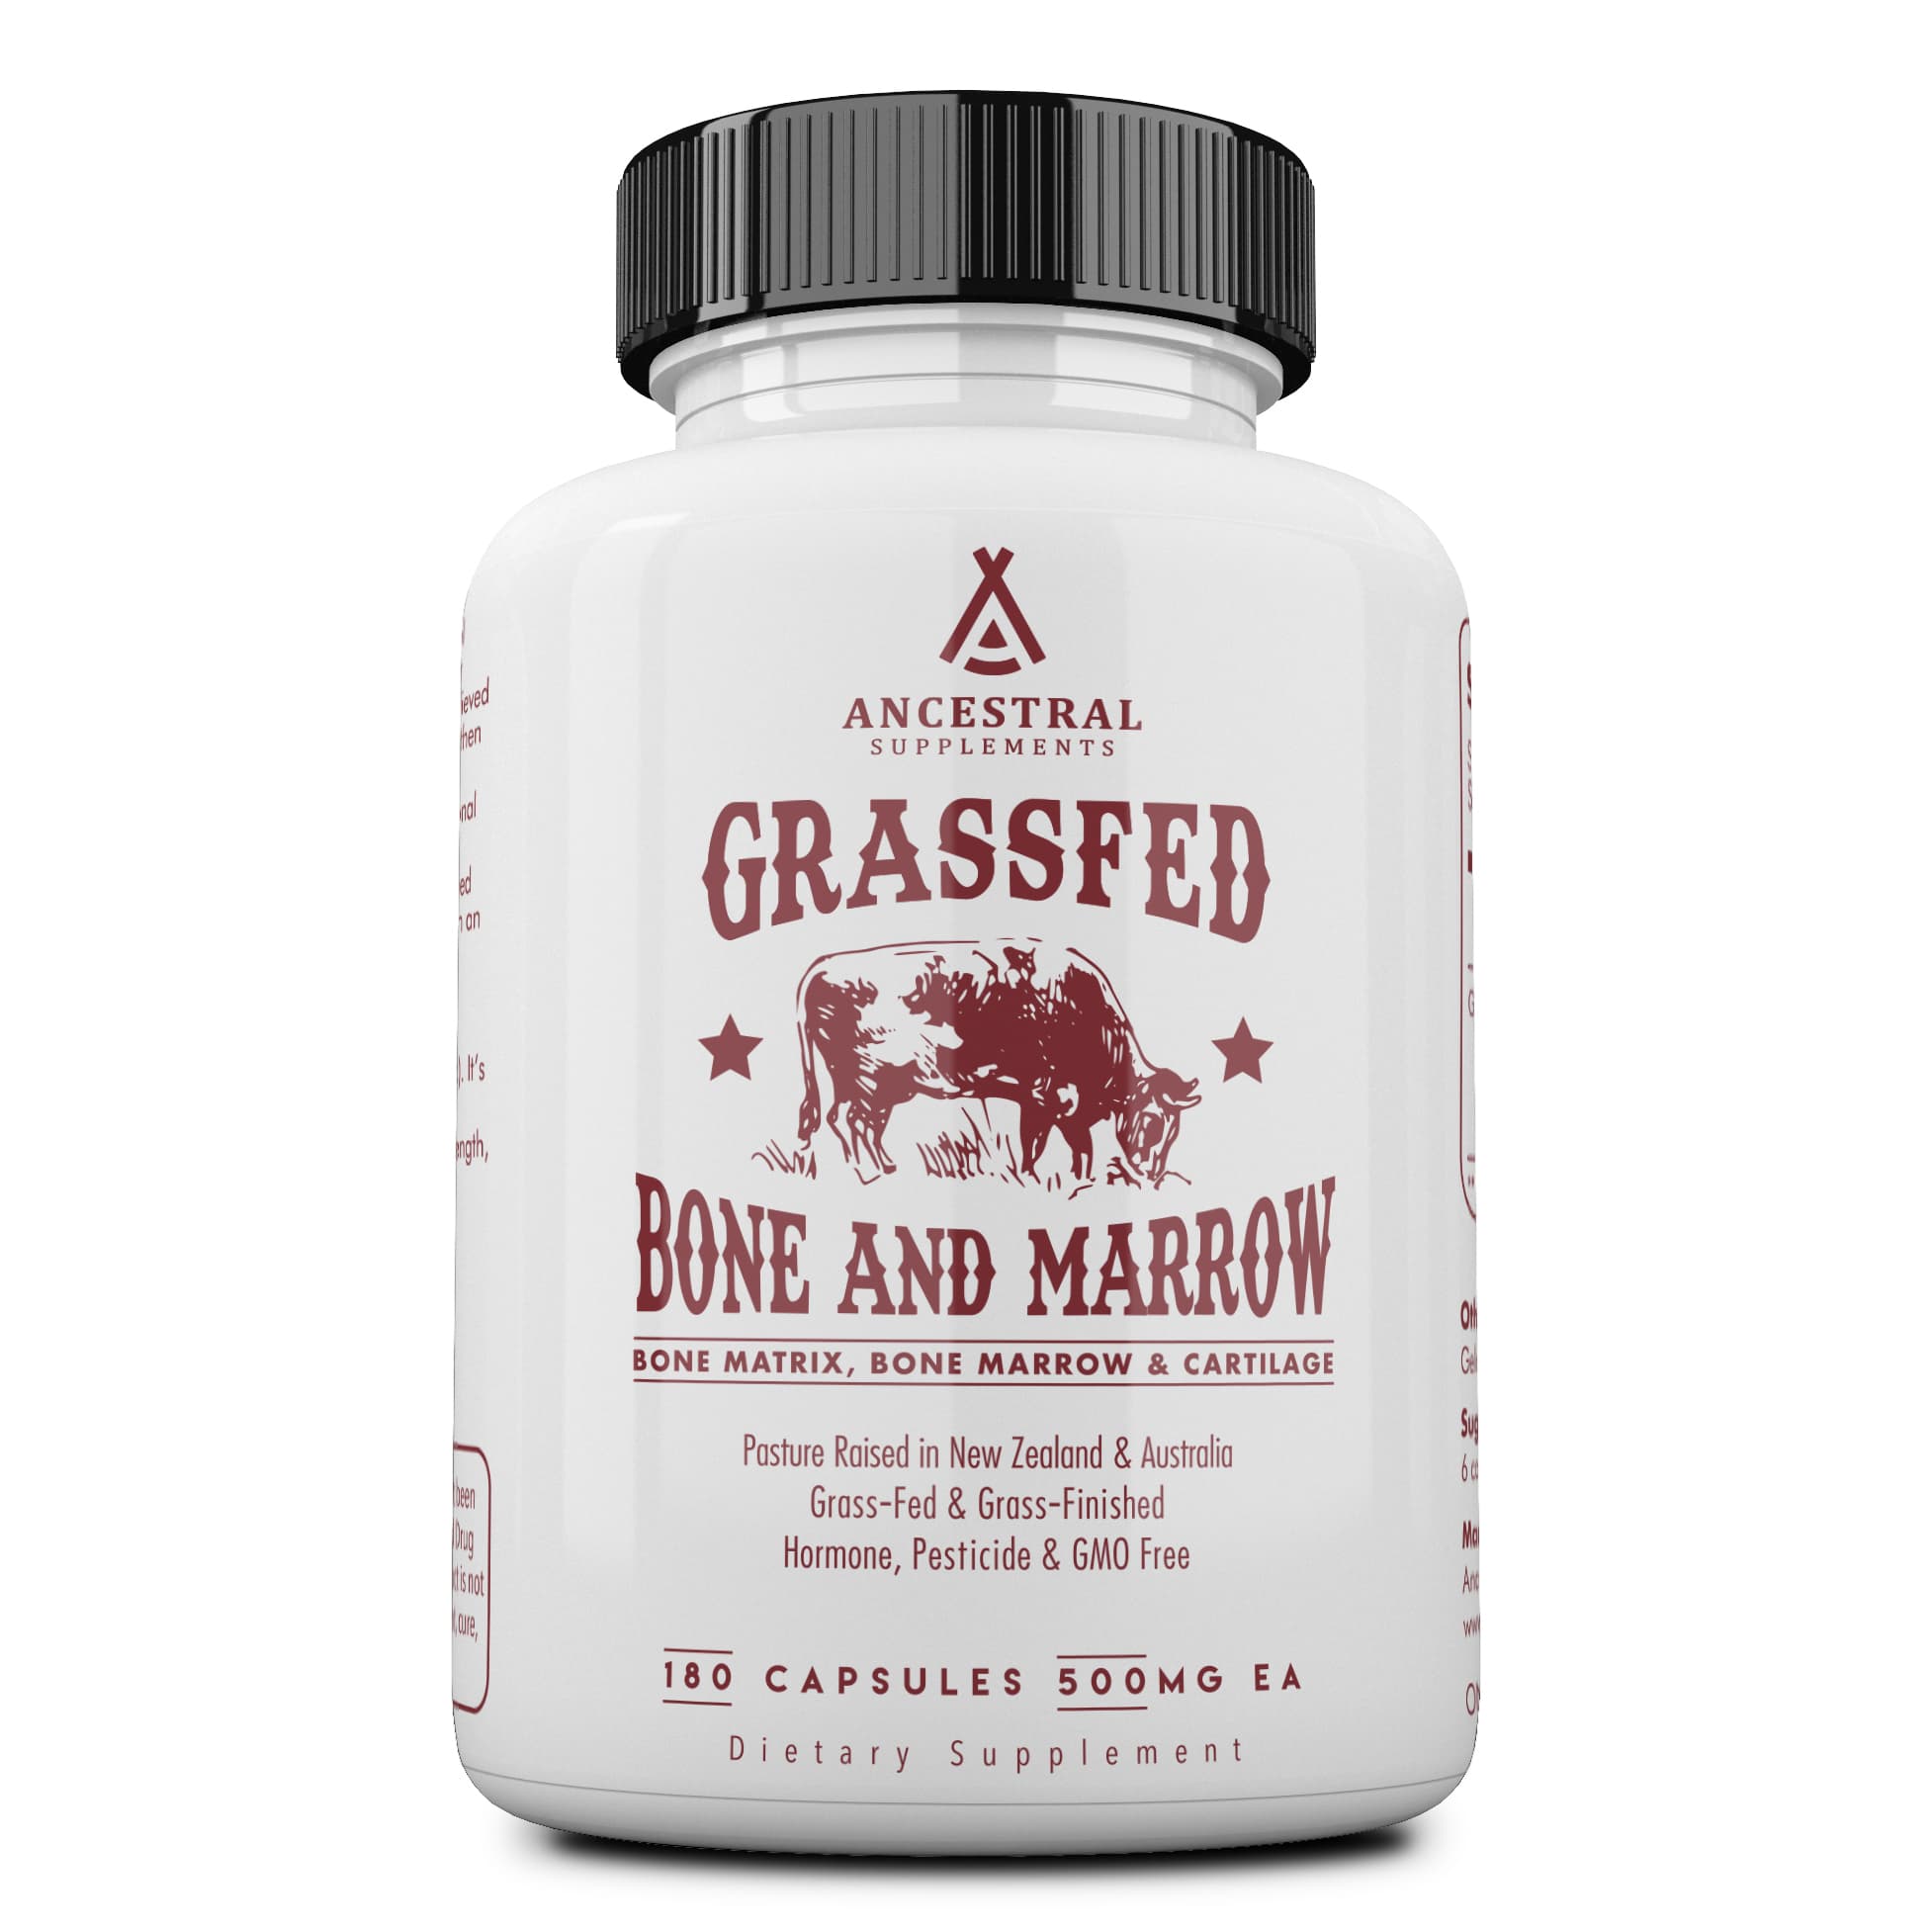 Ancestral Supplements Grassfed Bone and Marrow